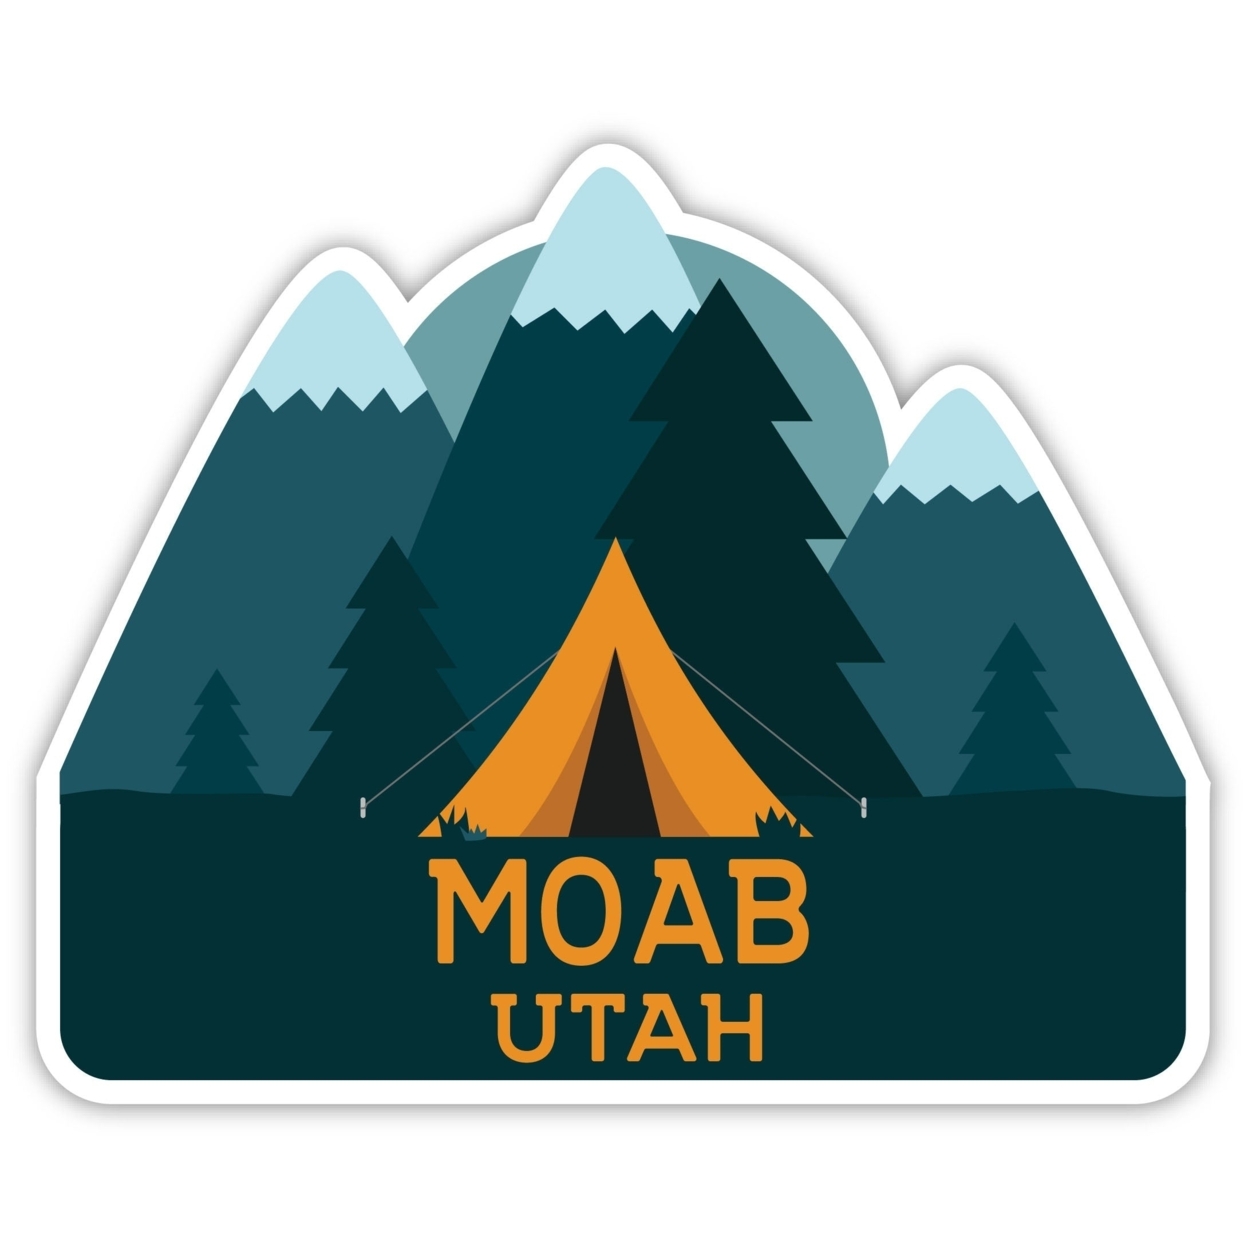 Moab Utah Souvenir Decorative Stickers (Choose Theme And Size) - 4-Inch, Camp Life